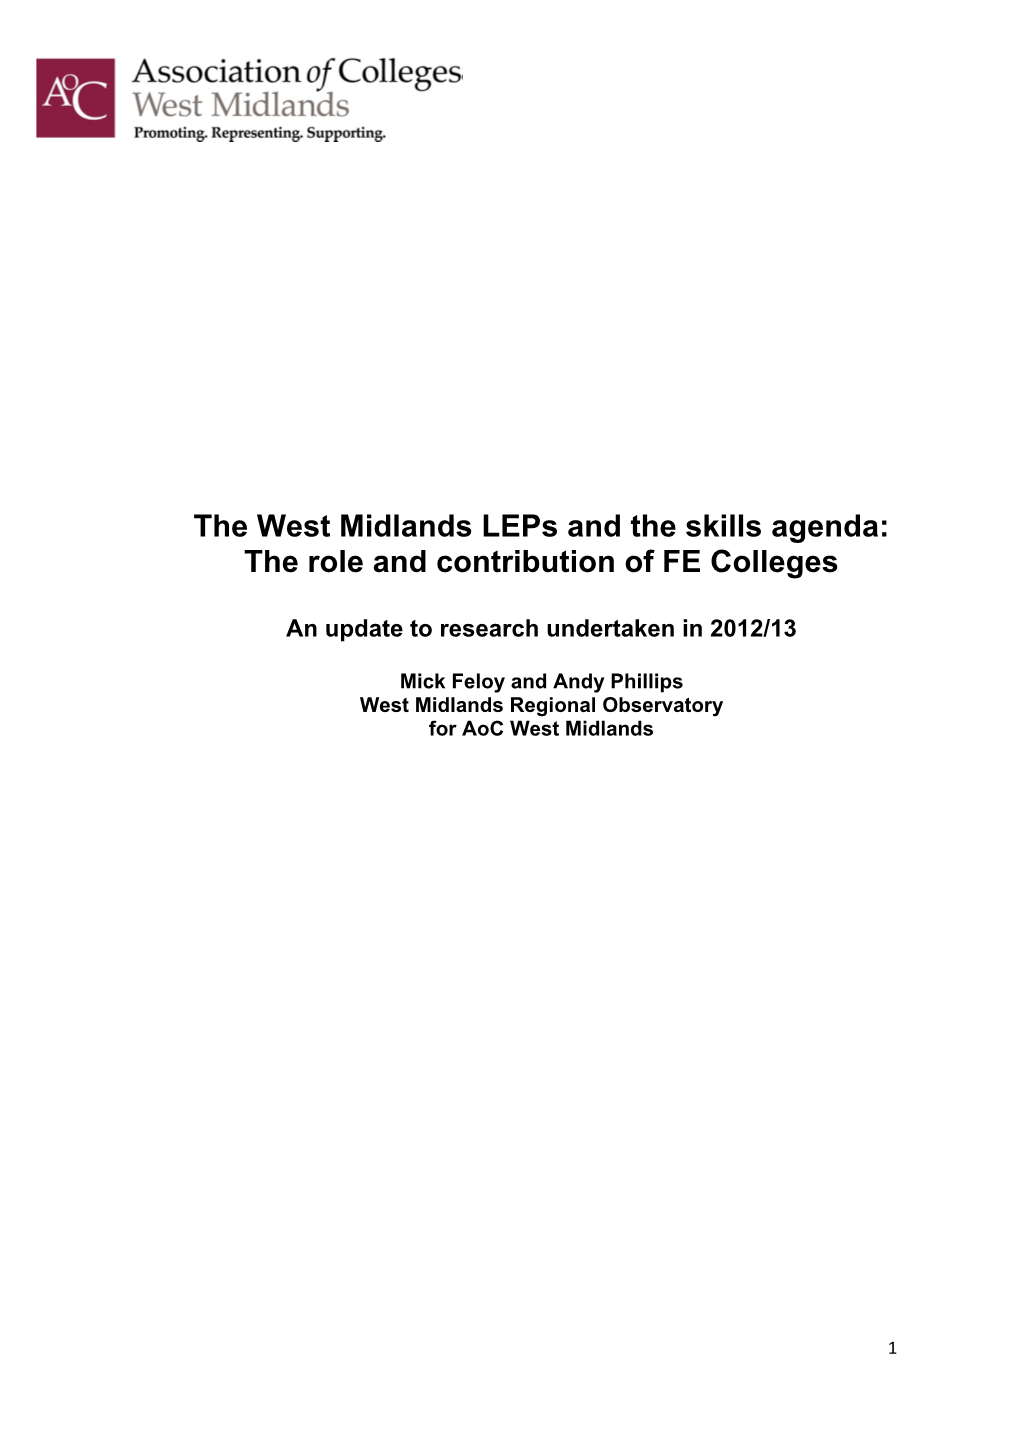 West Midlands Leps and FE Colleges